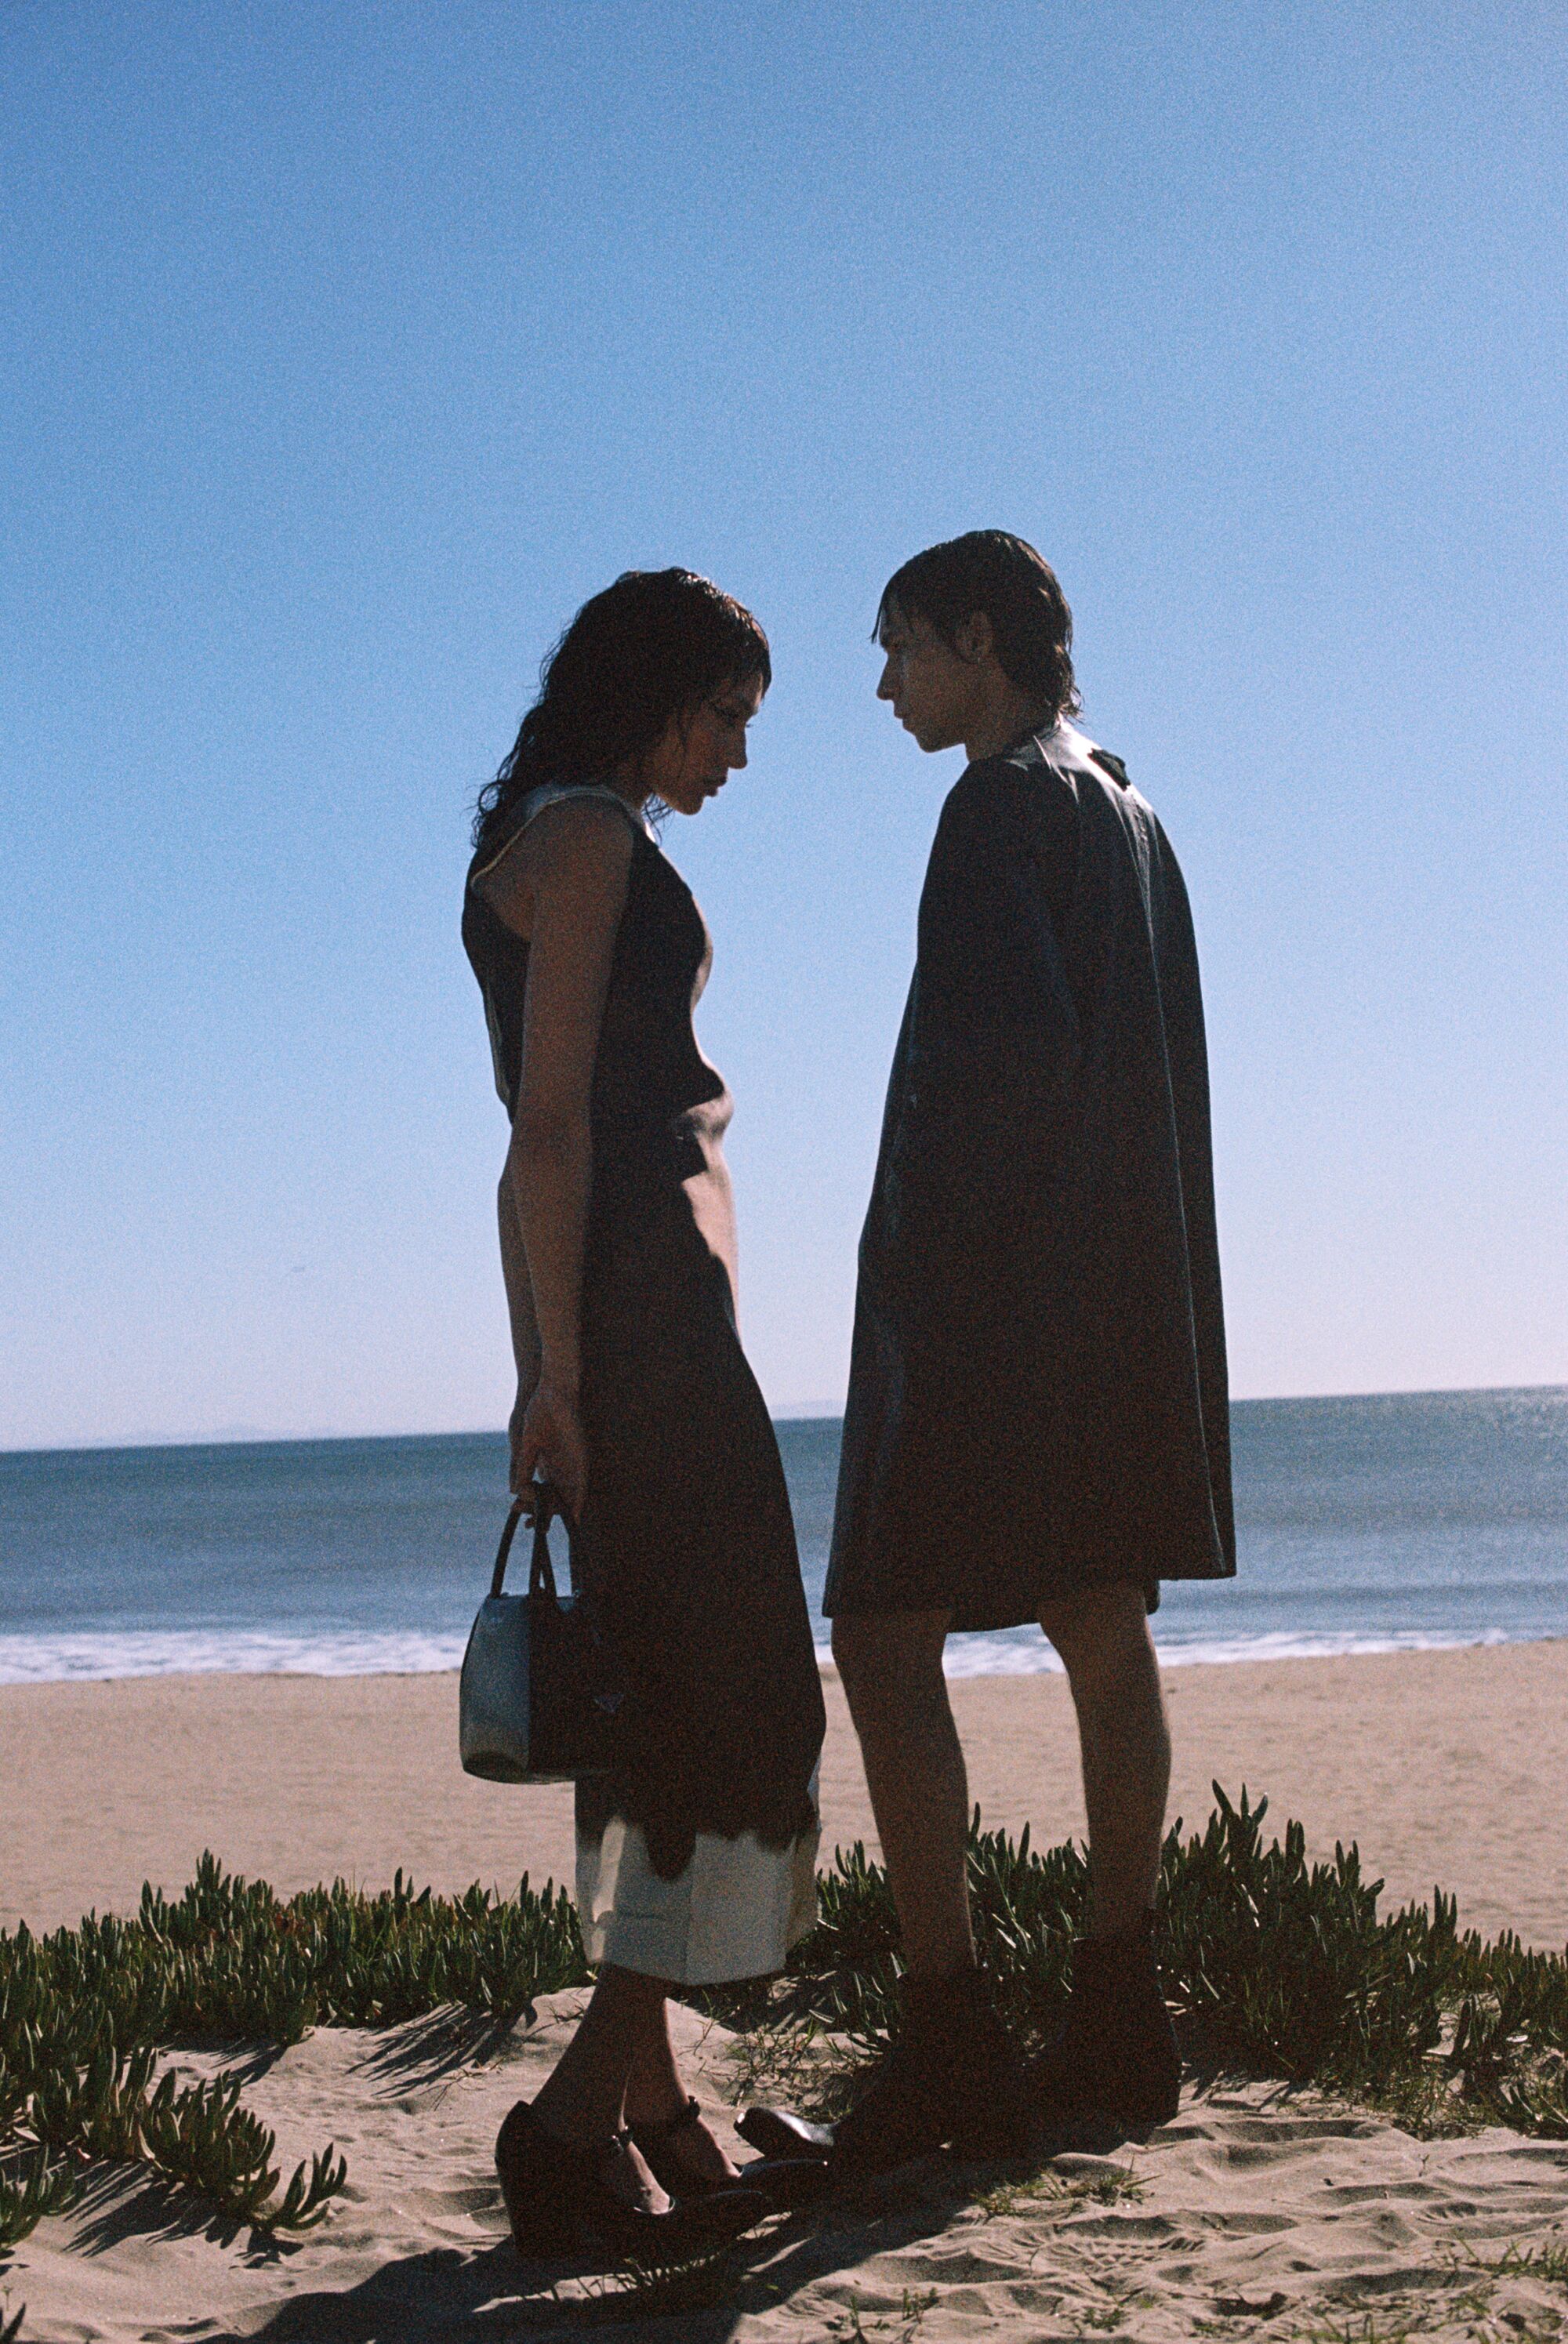 Two models on a beach, dressed in black and silhouetted by the sun.